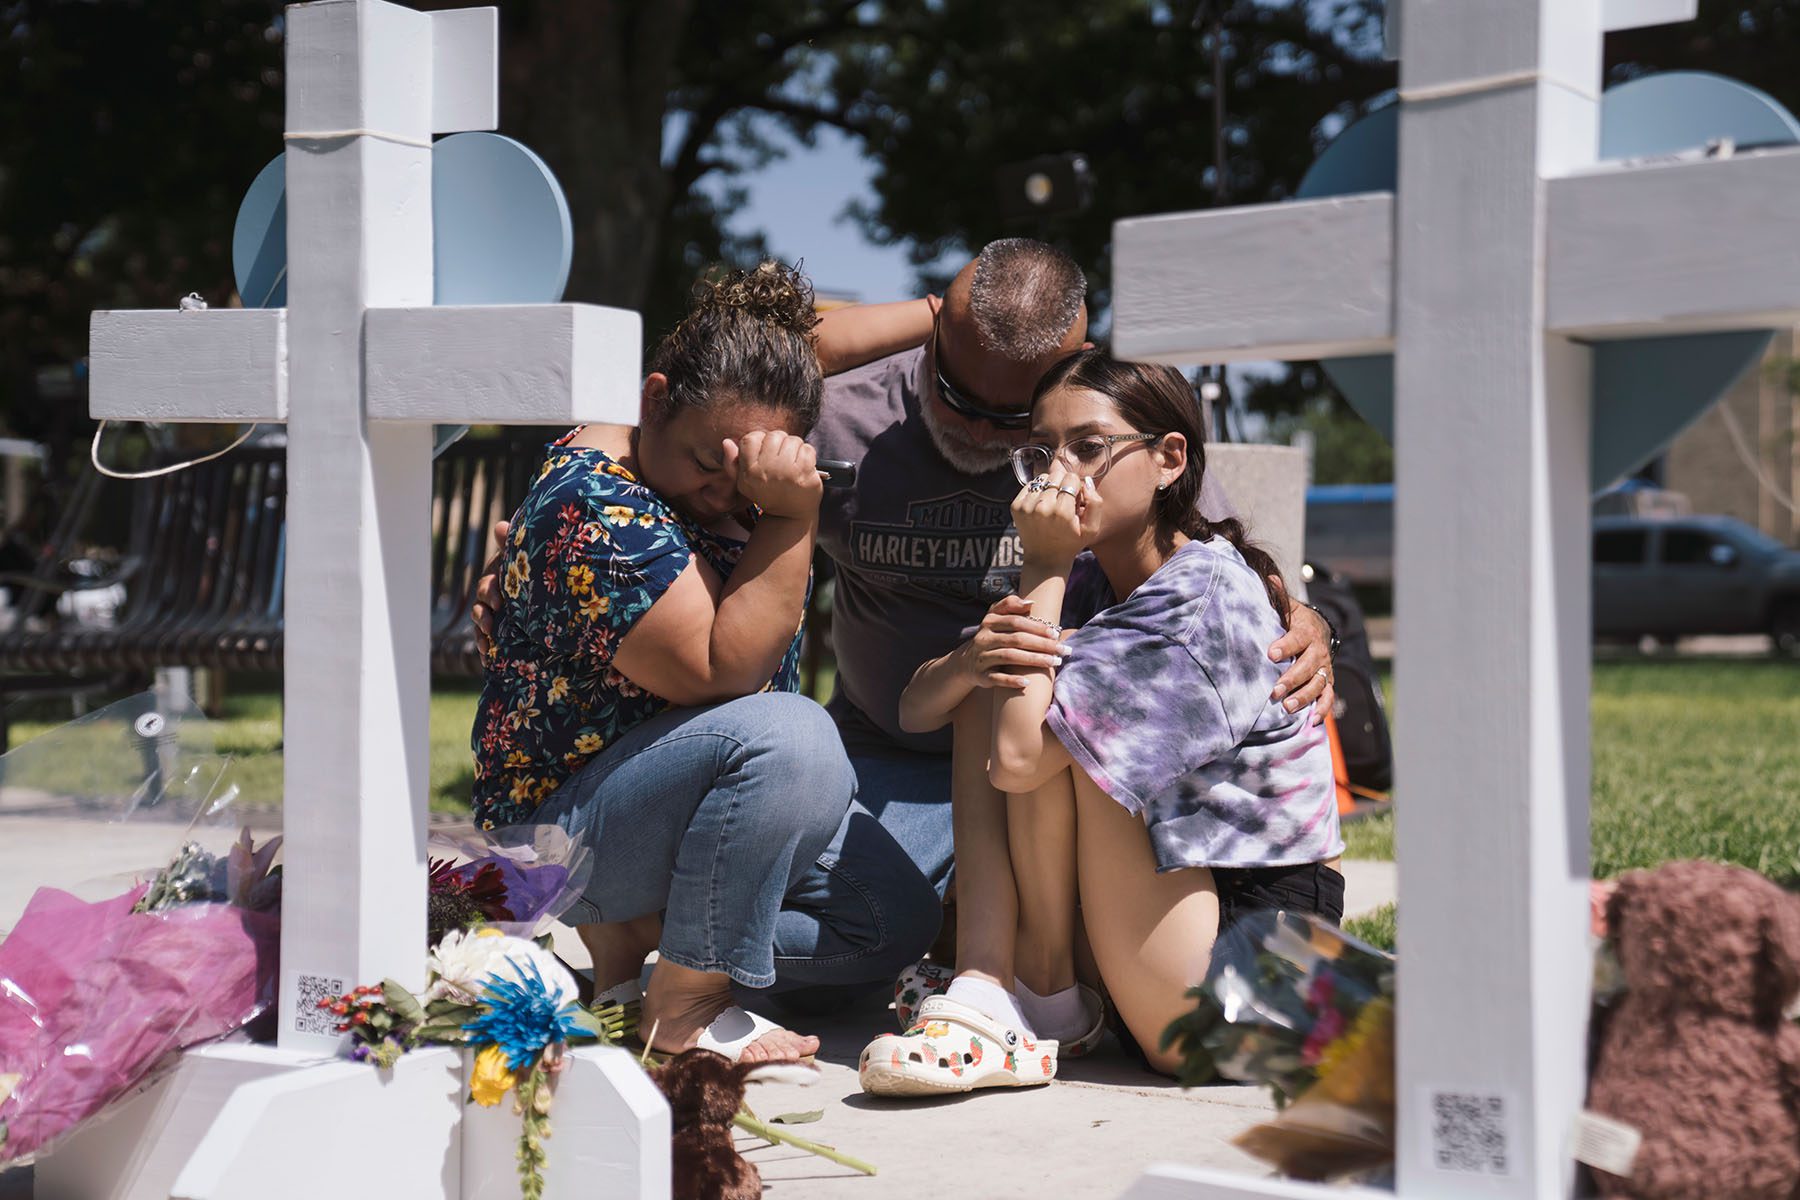 People visit a memorial in the town square for victims of the mass shooting in Uvalde, Texas.